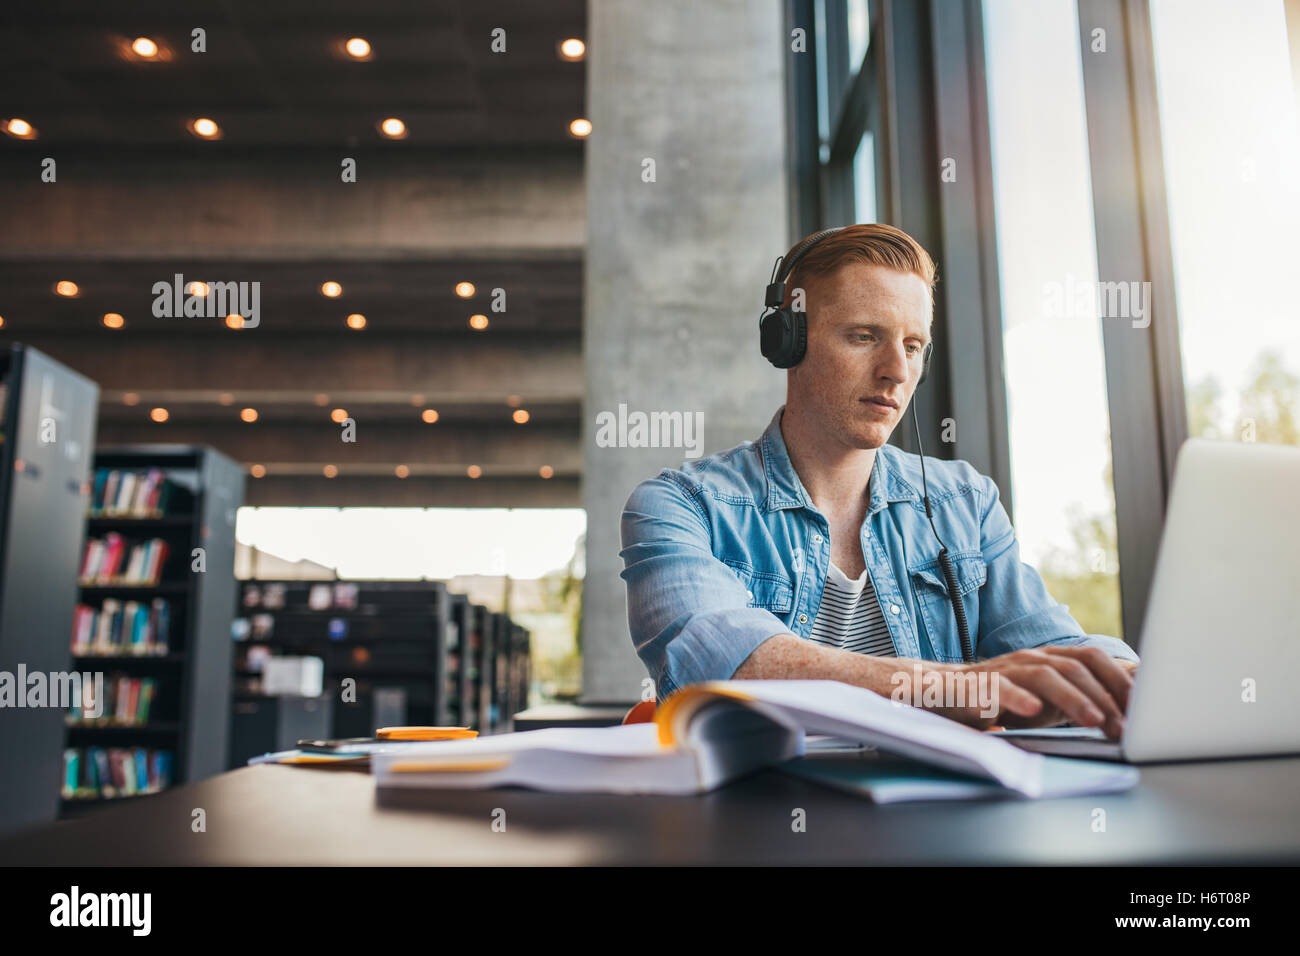 Young male student with headphones studying on the laptop. Handsome caucasian man sitting at the desk and working on laptop at p Stock Photo